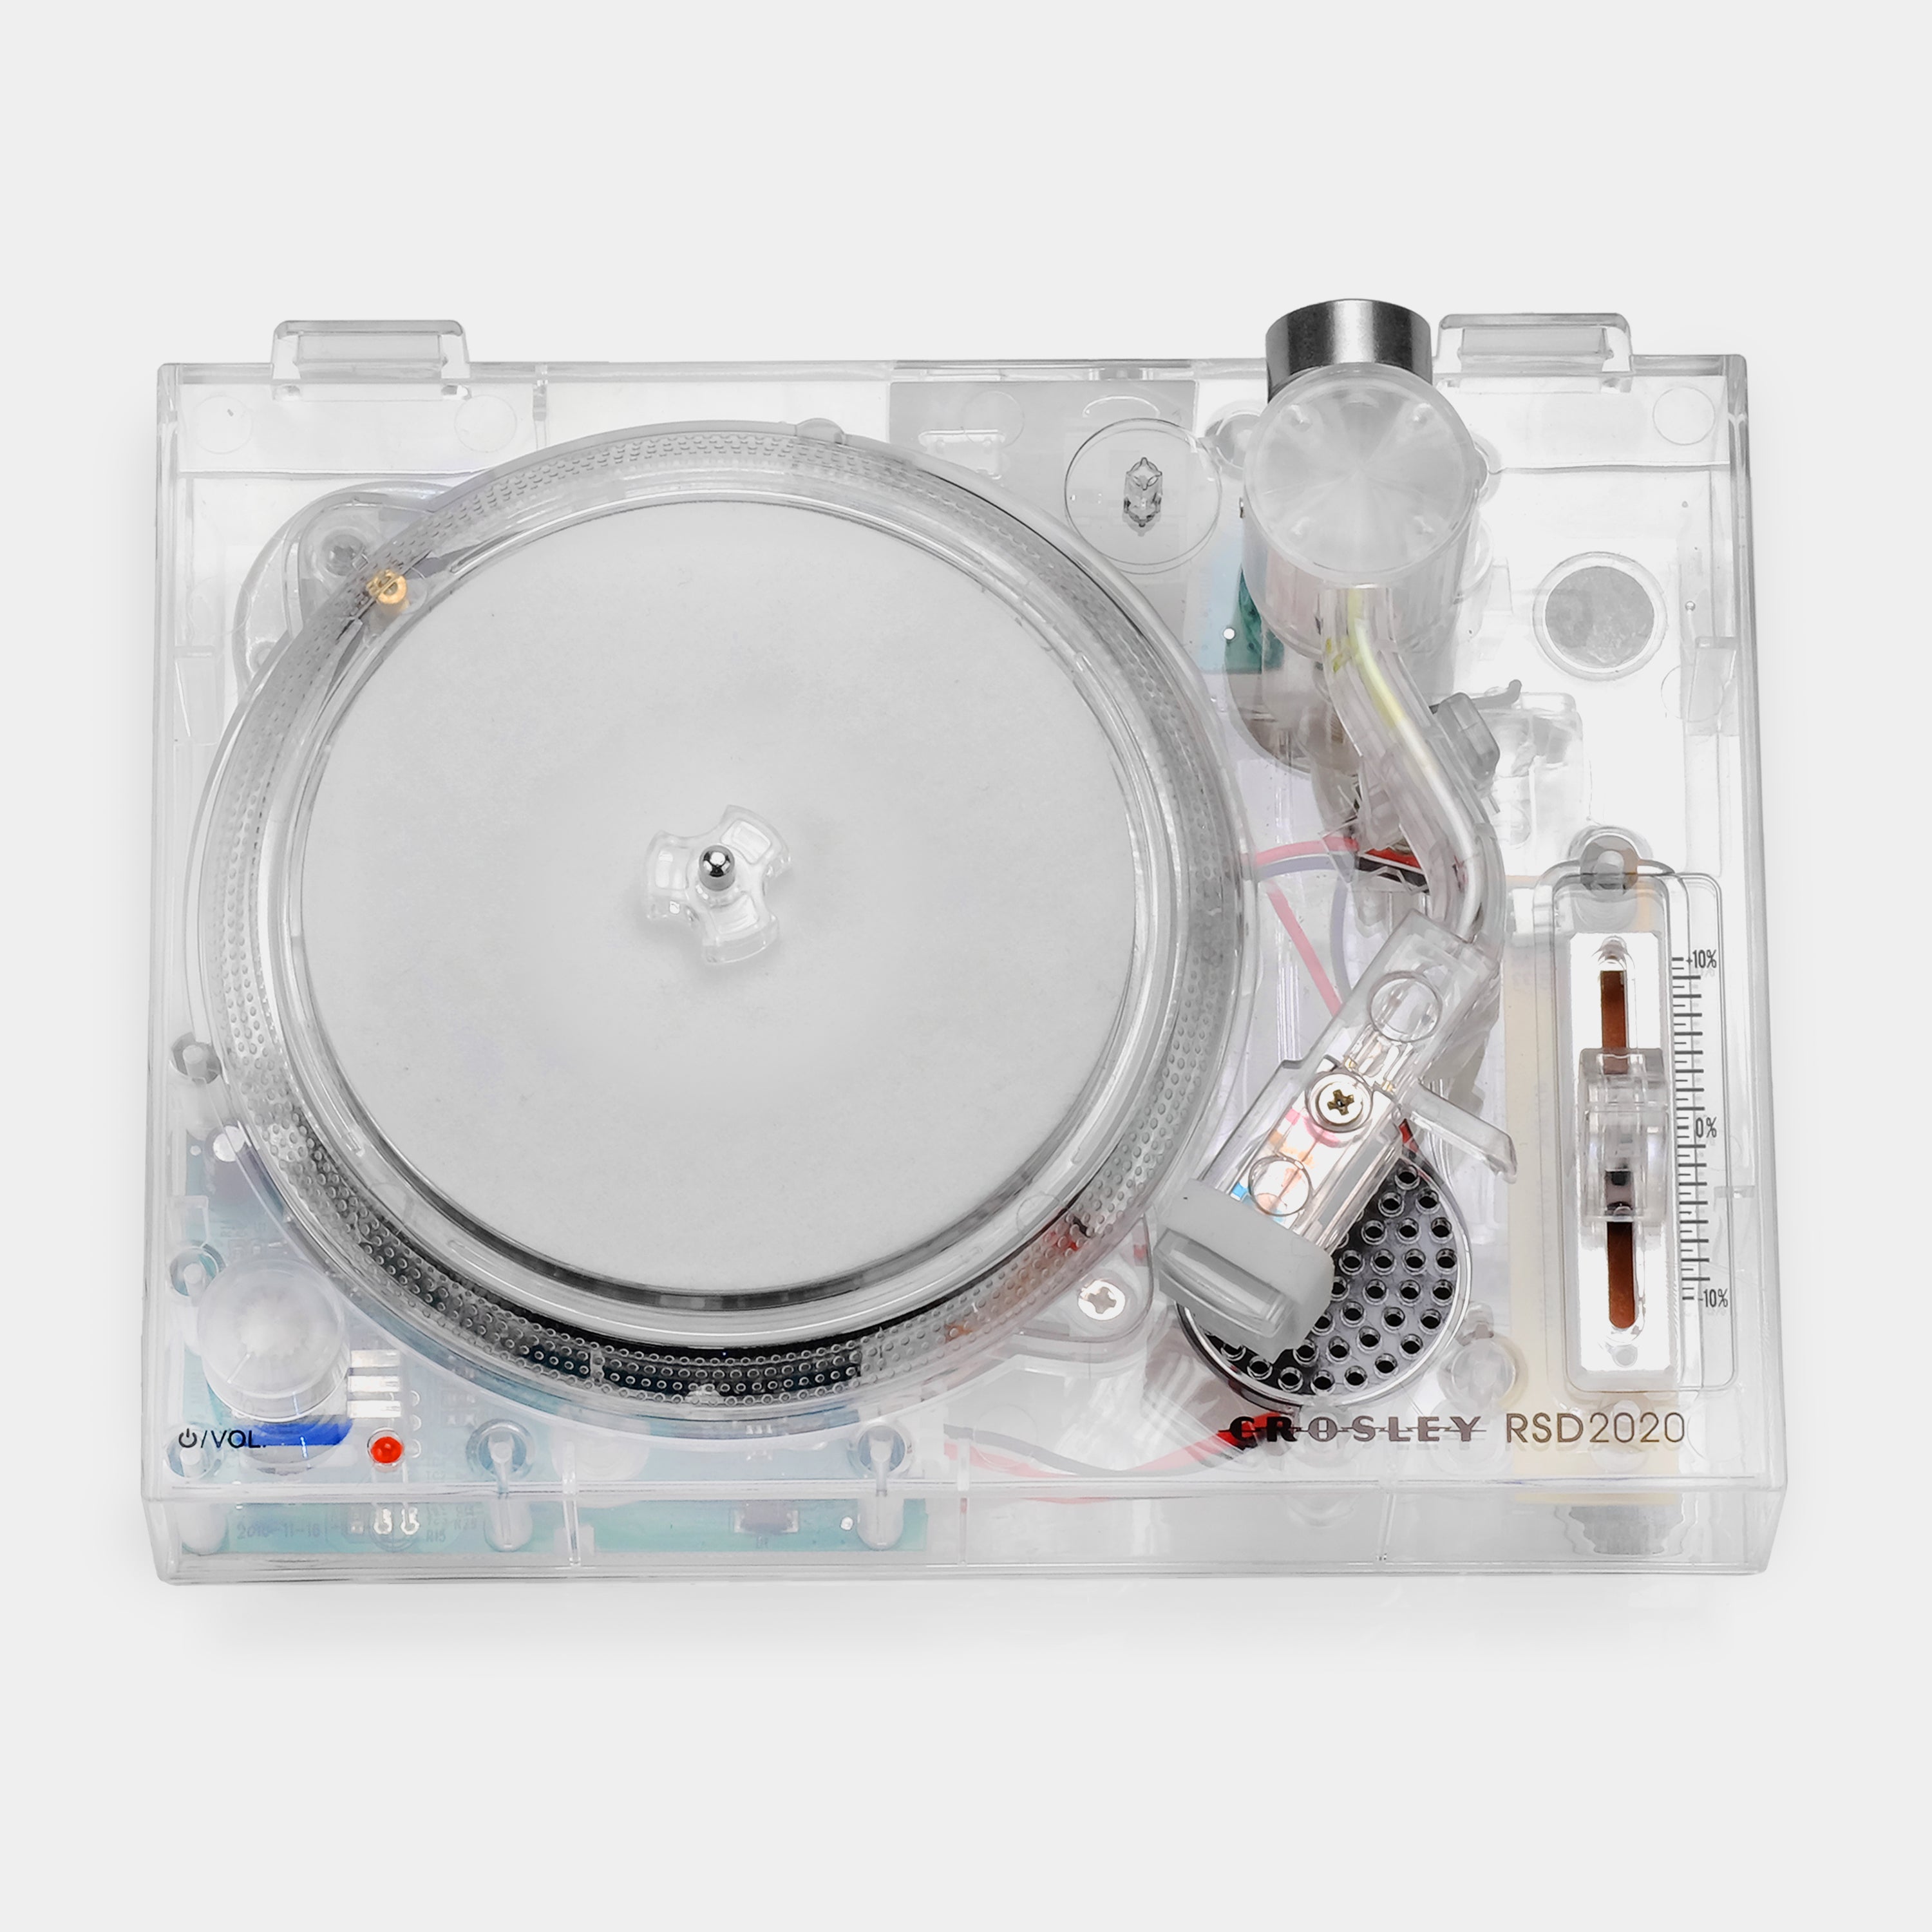 Transparent mini turntable released for Record Store Day - Vinyl